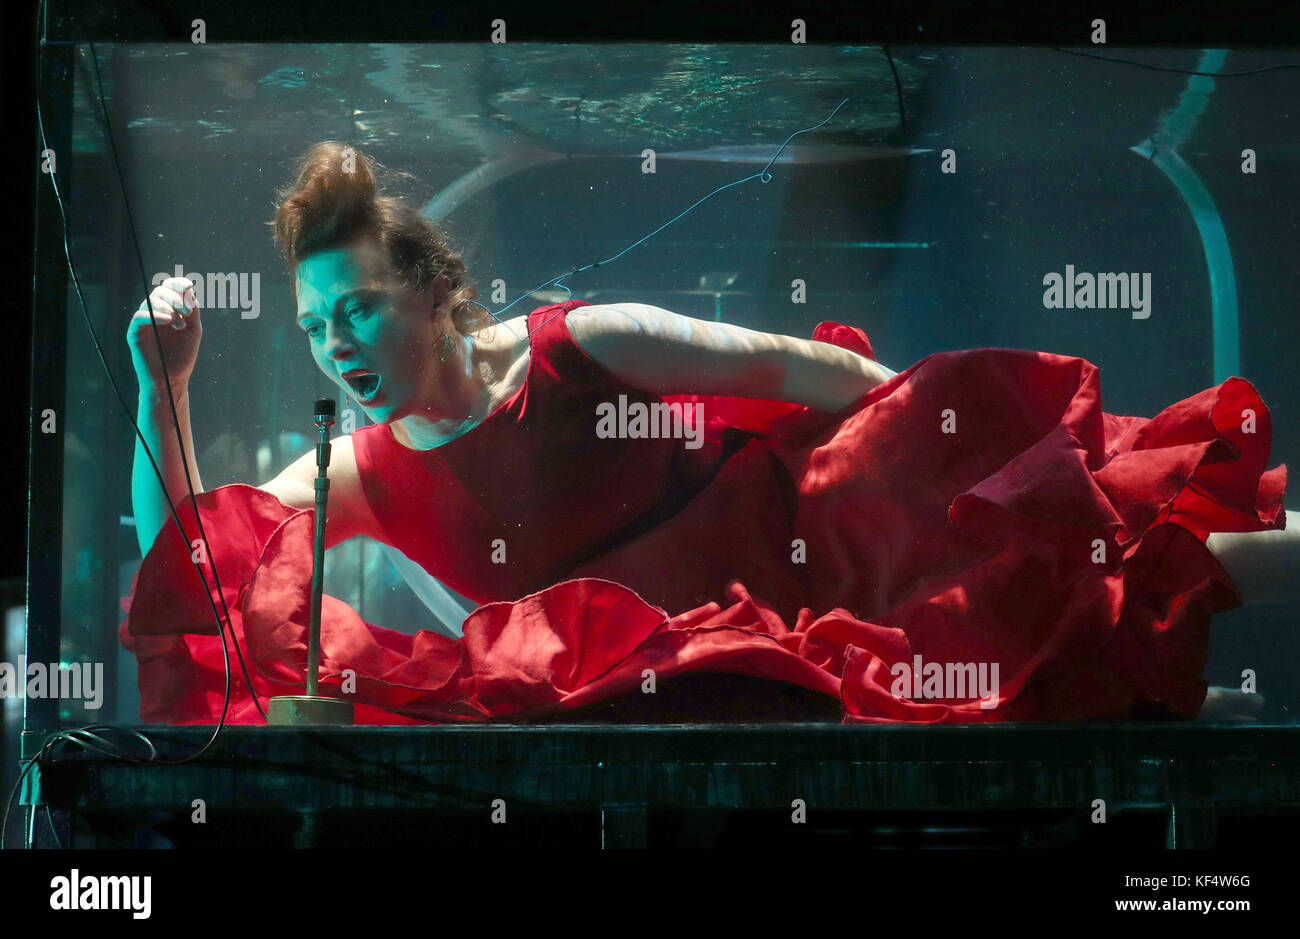 Vocalist Laila Skovmand, a musician with Danish company Between Music, plays underwater in a tank during a rehearsal ahead of their UK premiere concert Aquasonic at the Tramway in Glasgow. Stock Photo